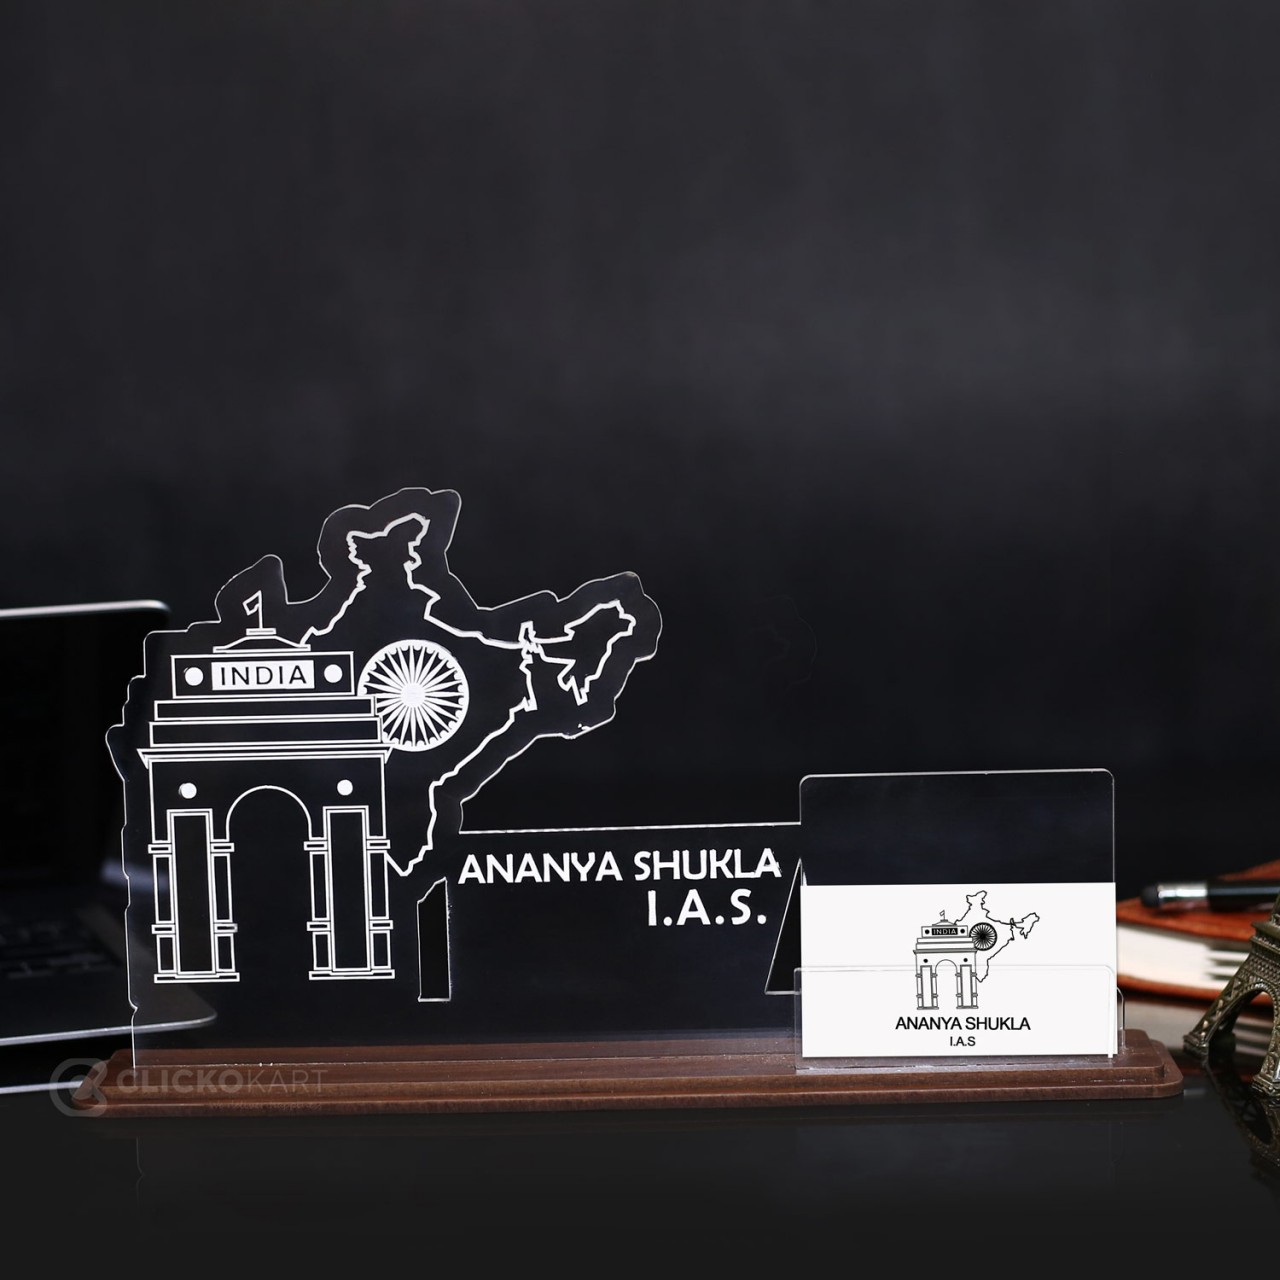 Personalized Acrylic Desk Name Plate For IAS Officers